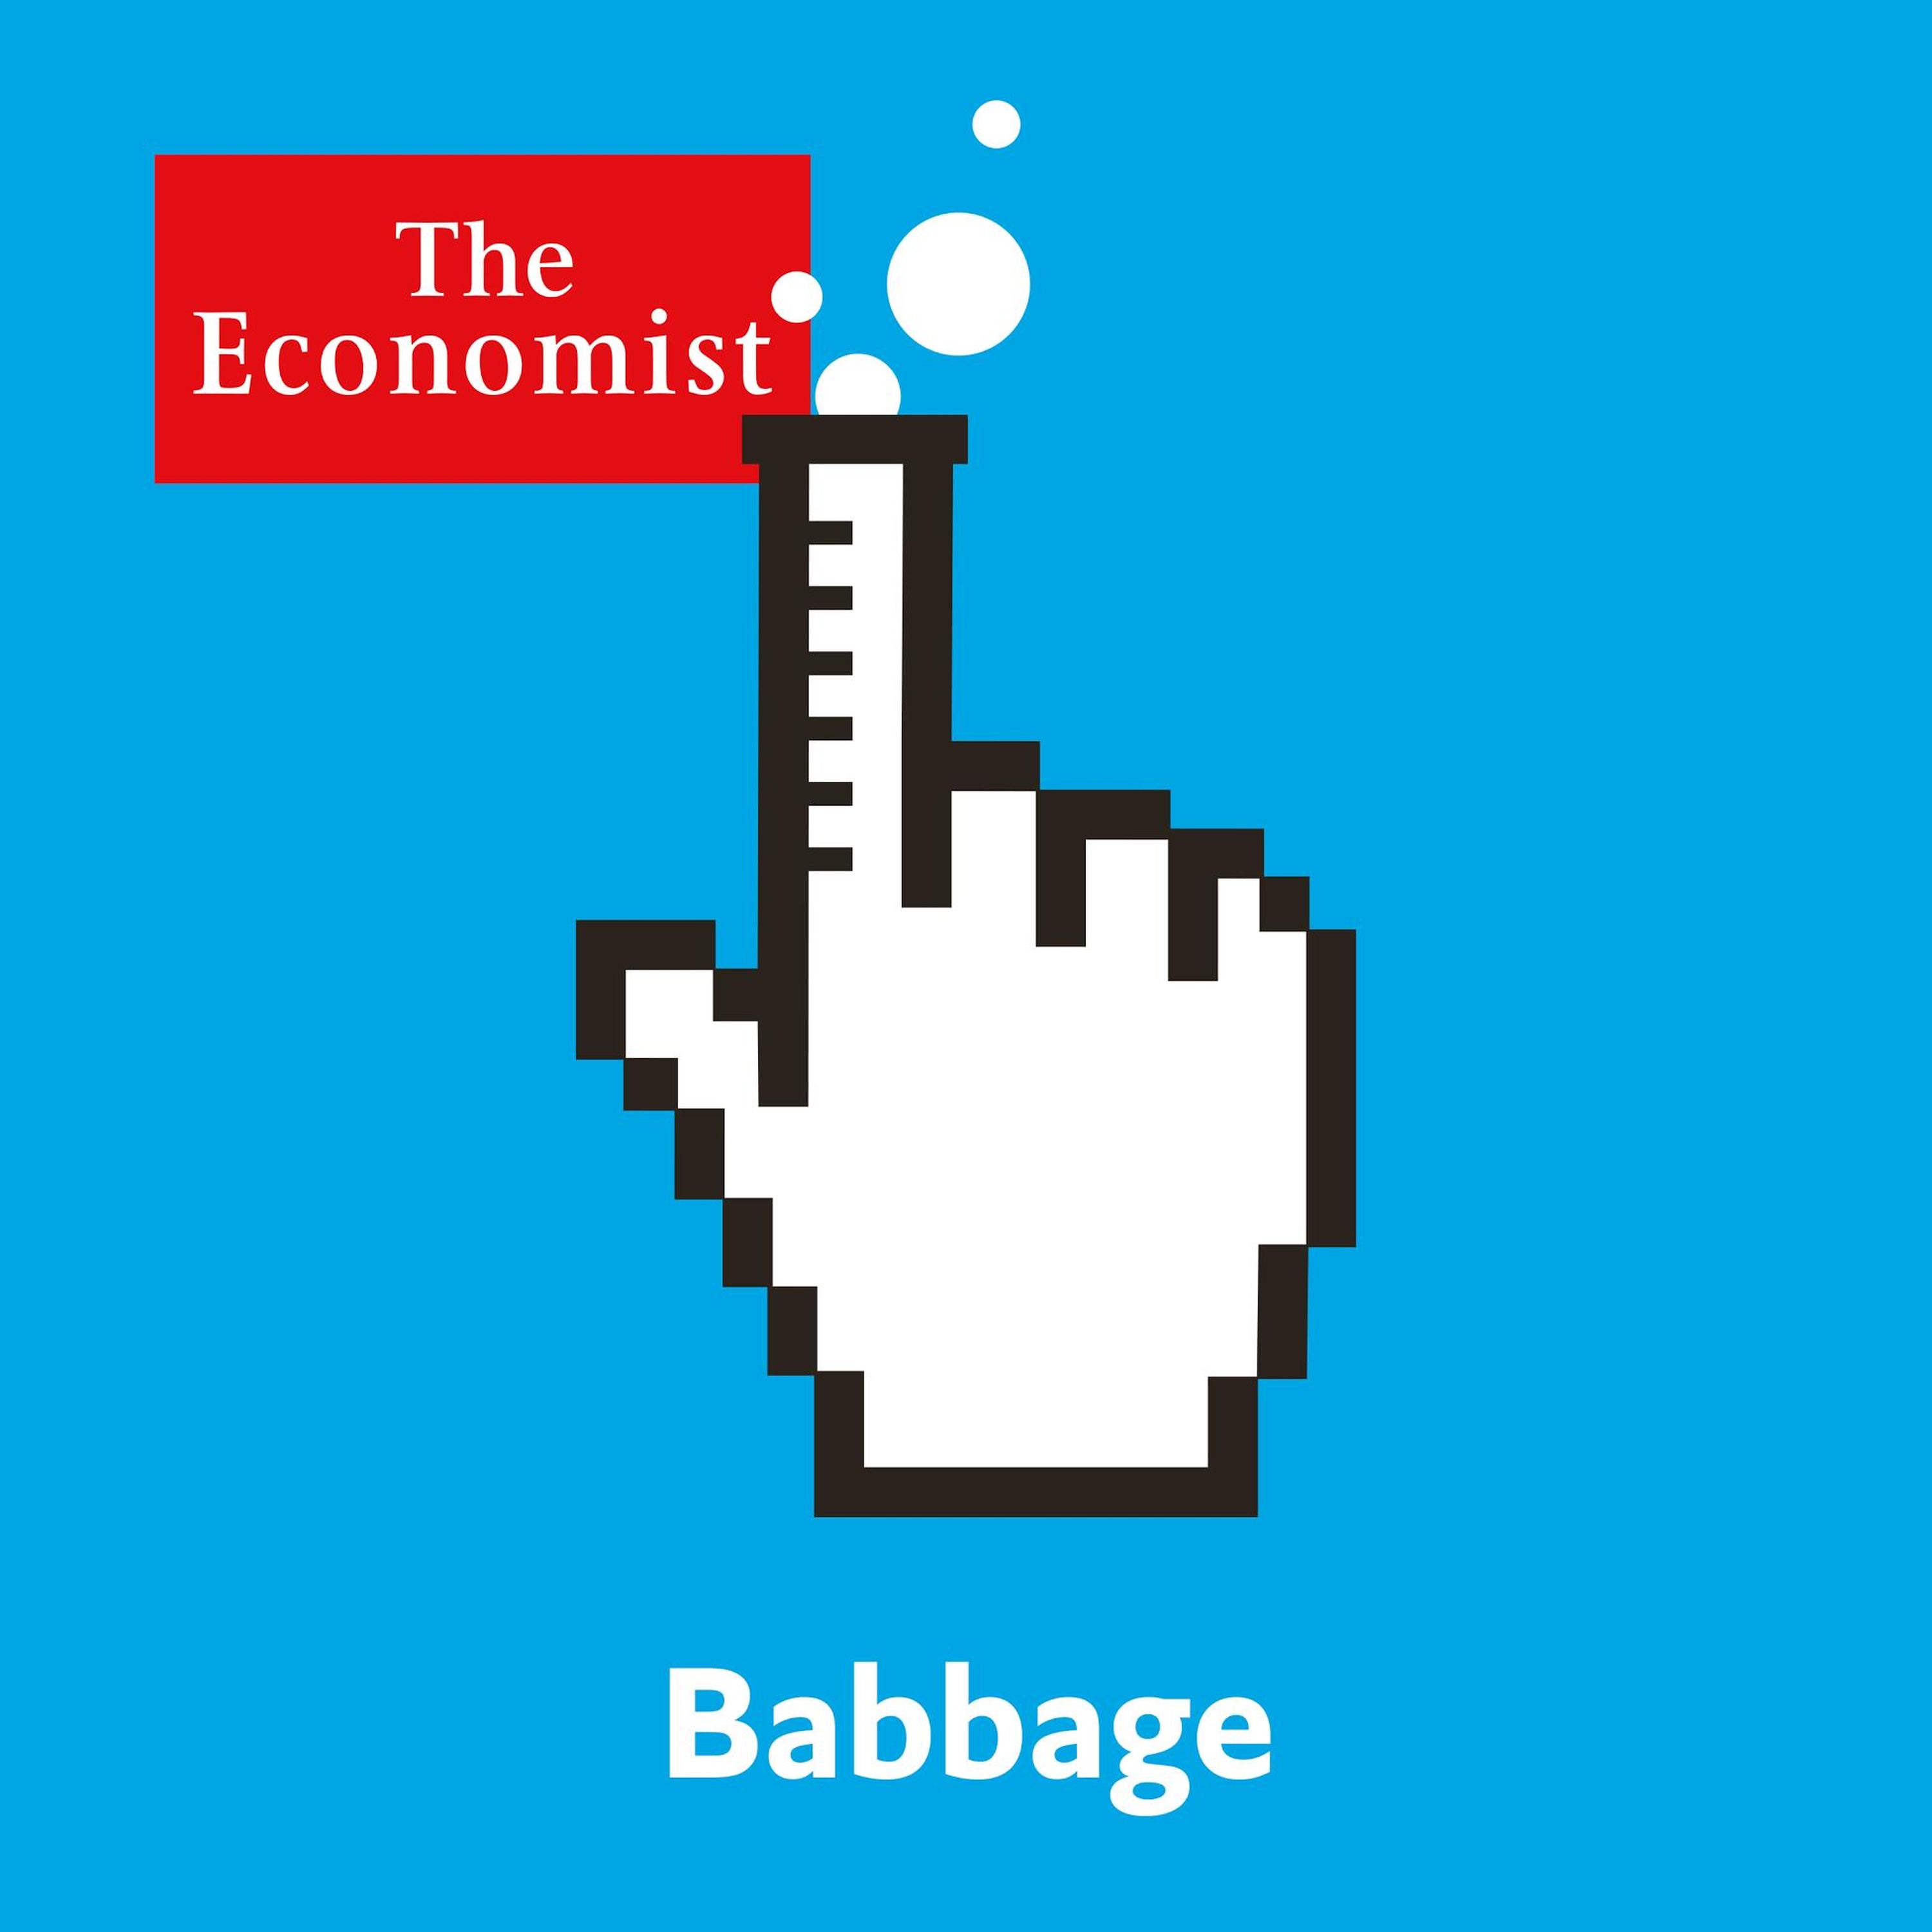 Babbage: Cleaning the air